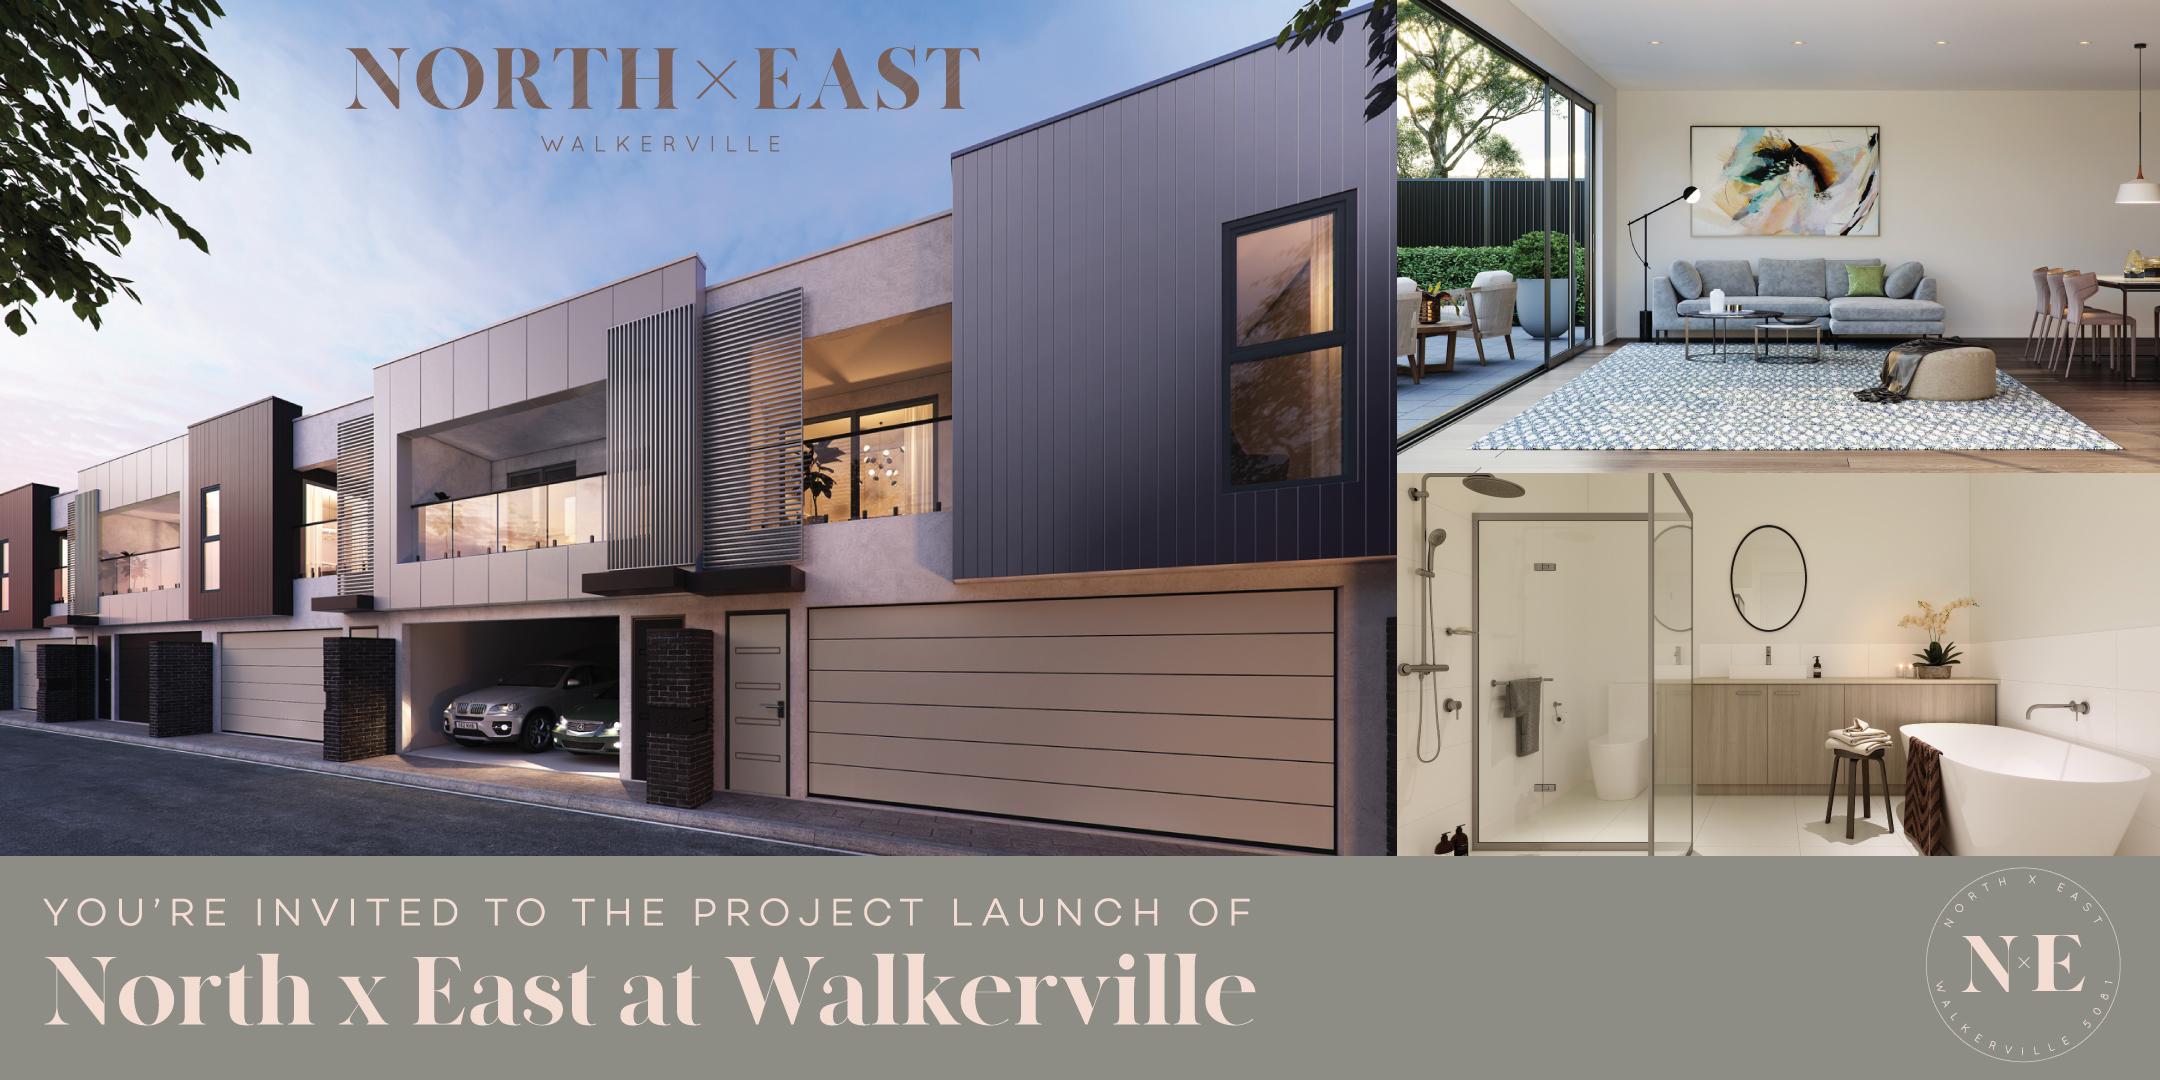 North x East at Walkerville: Project Development Launch